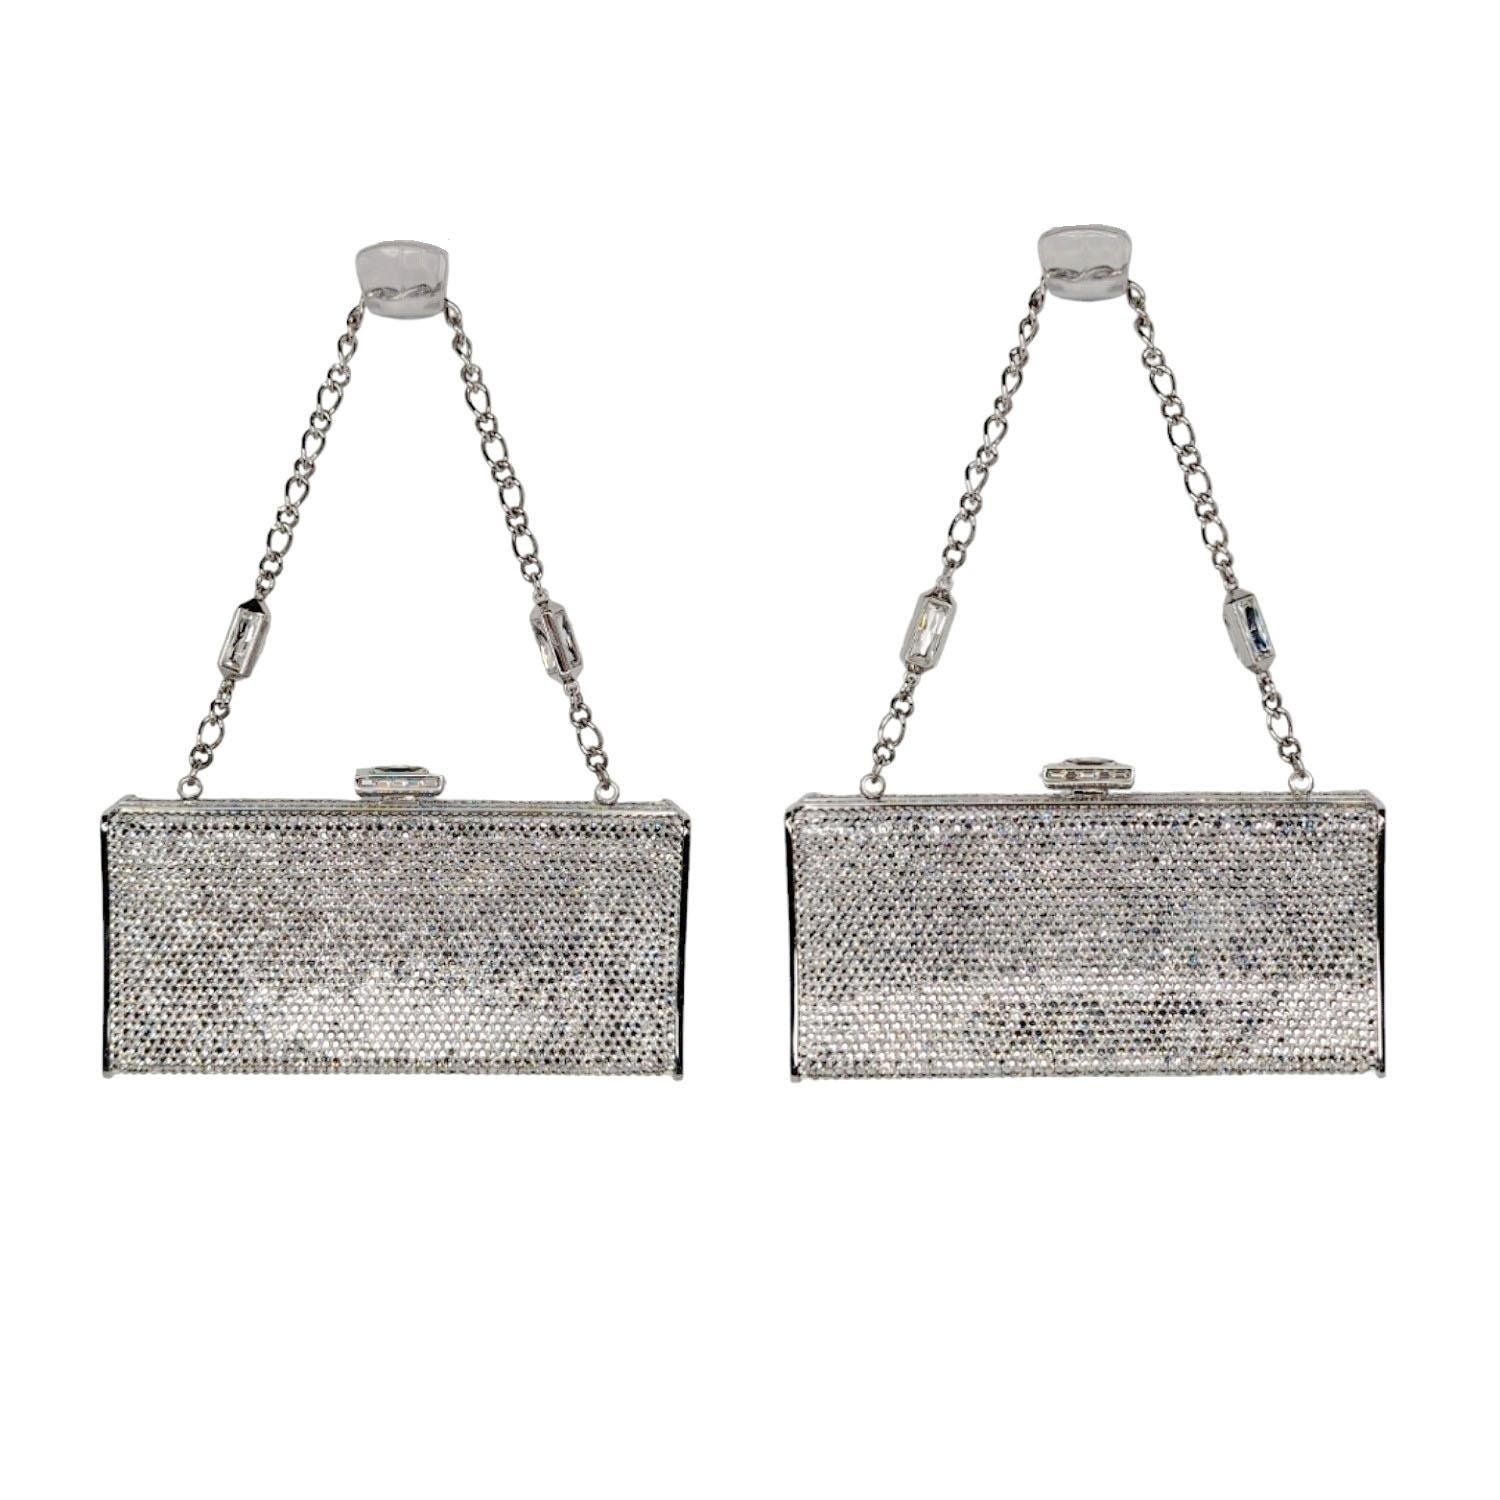 JUDITH LEIBER Swarovski Crystal Minaudiere Clutch Silver. Stunning things come in very small packages. This stunning evening clutch is entirely encrusted in crystals. The bag features a silver chain strap and a top press lock. The clutch opens to a